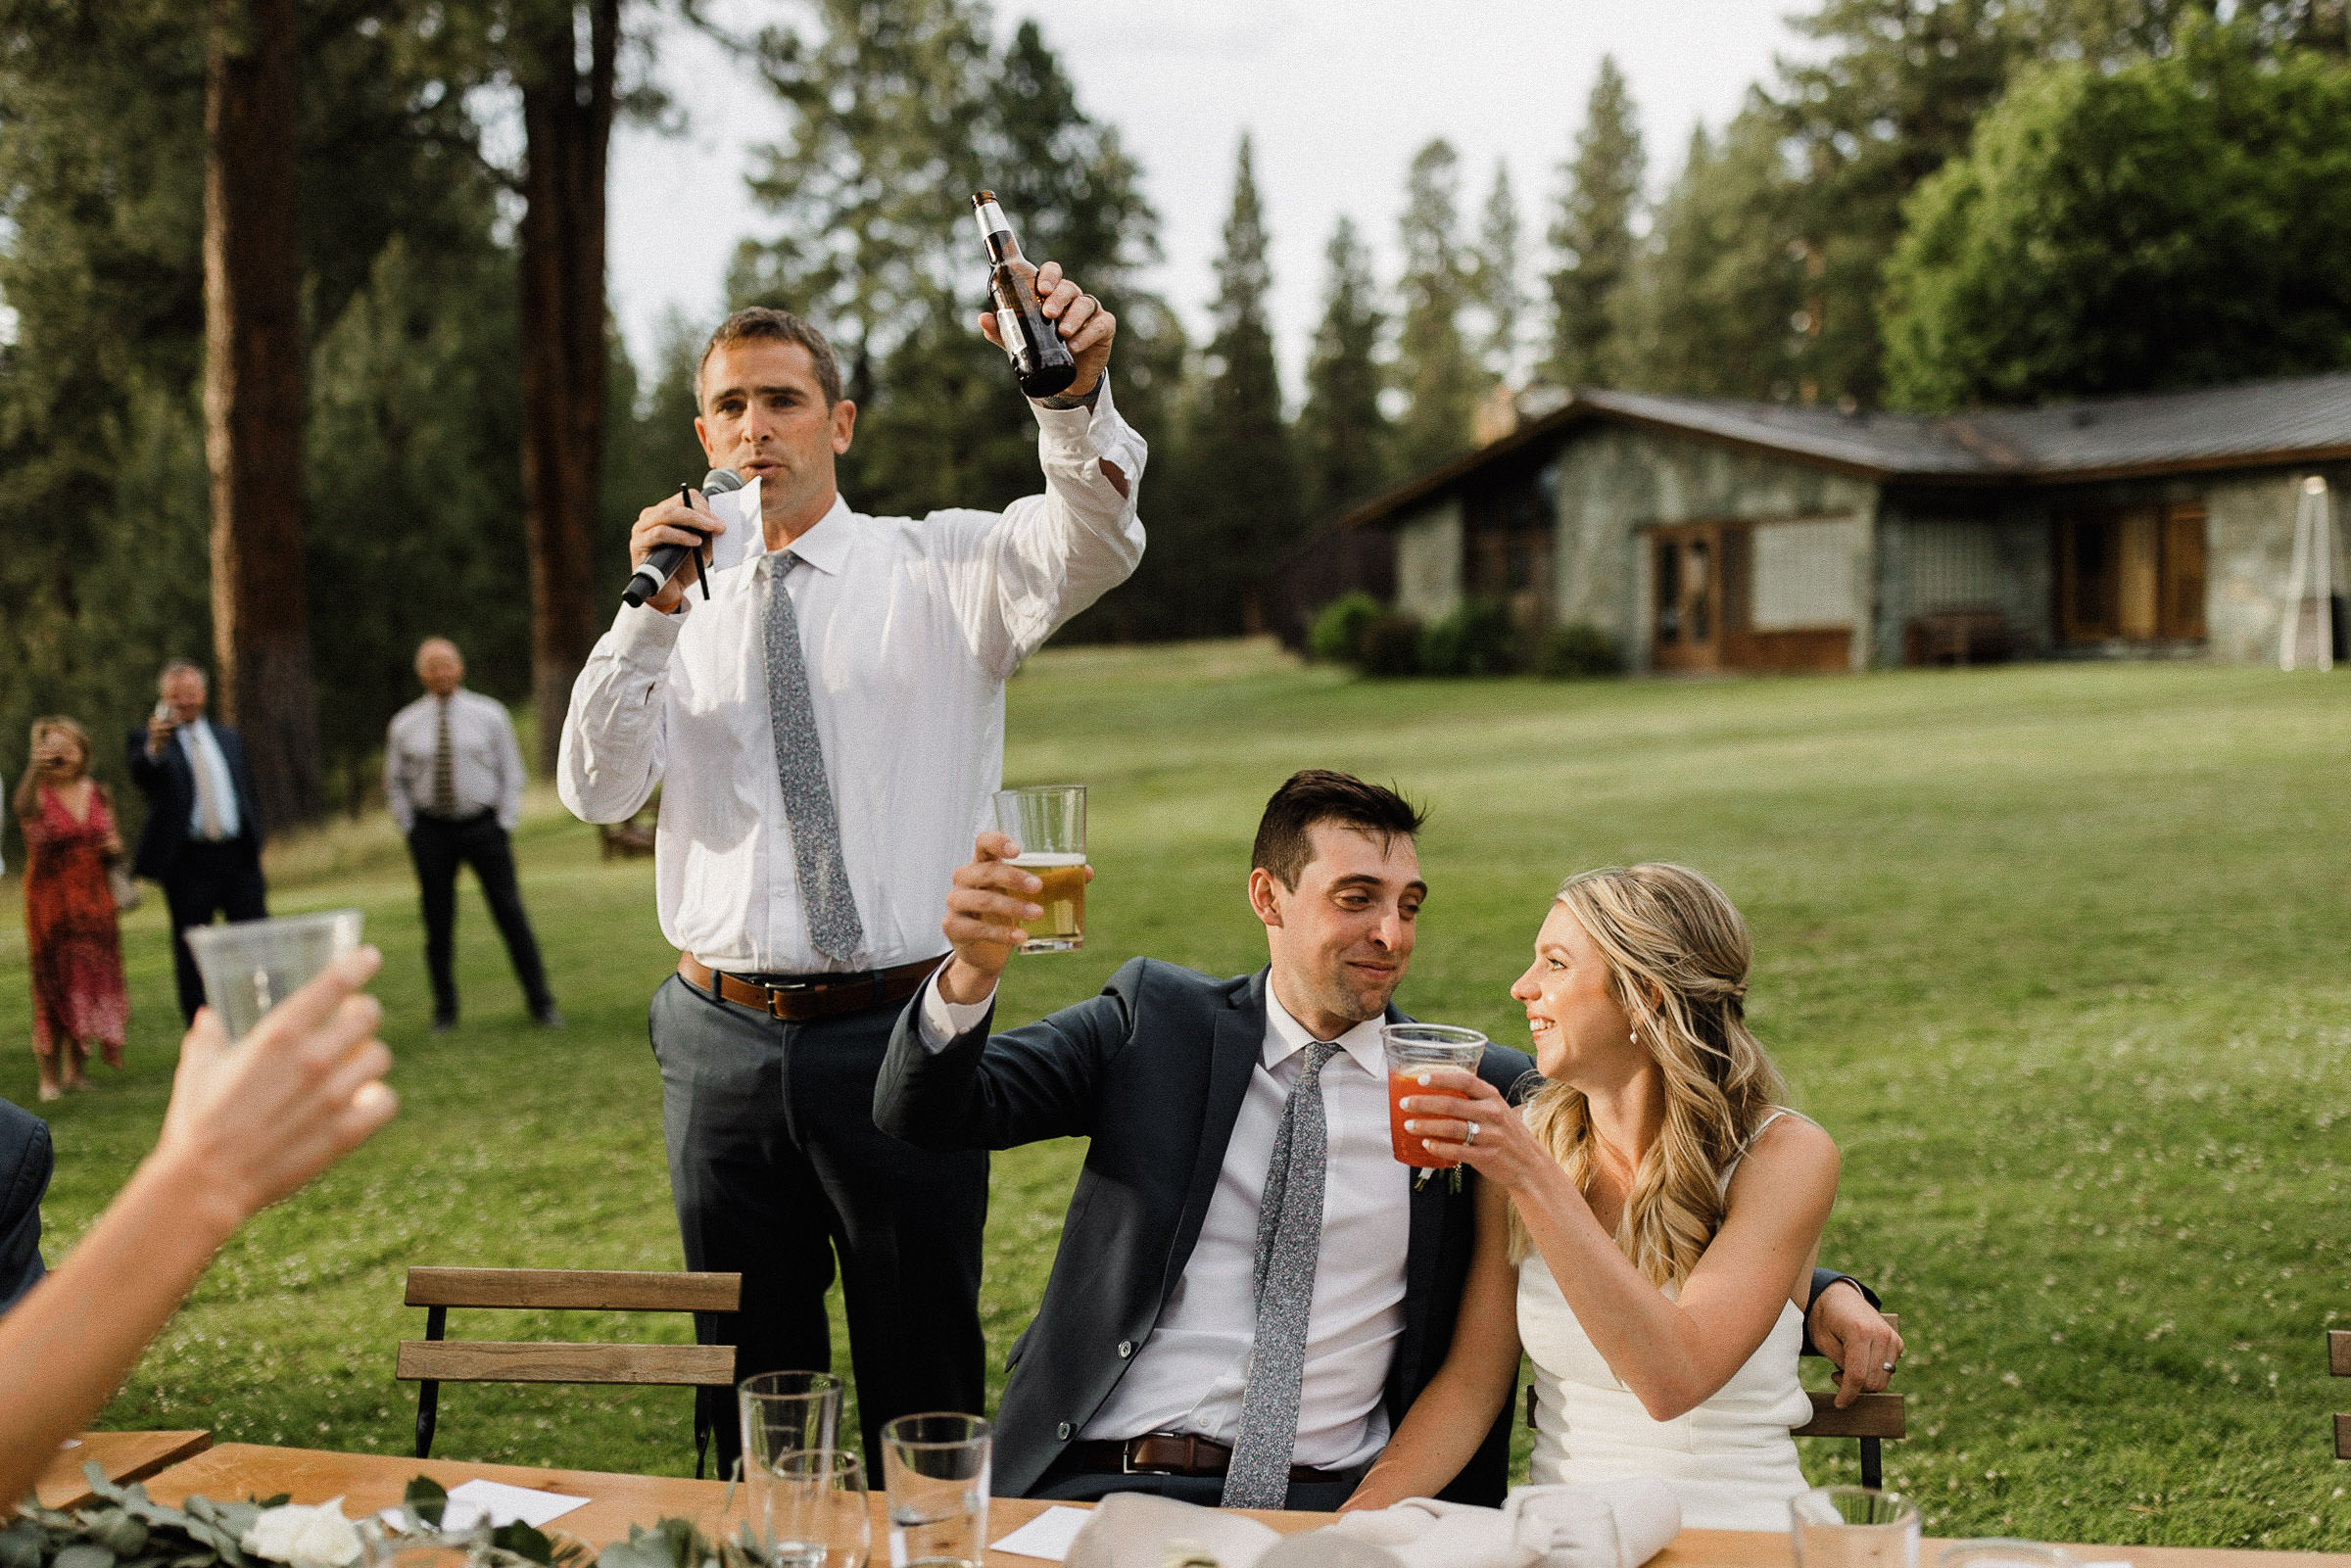 Bride and groom raise their glasses as the groom's brother concludes his toast